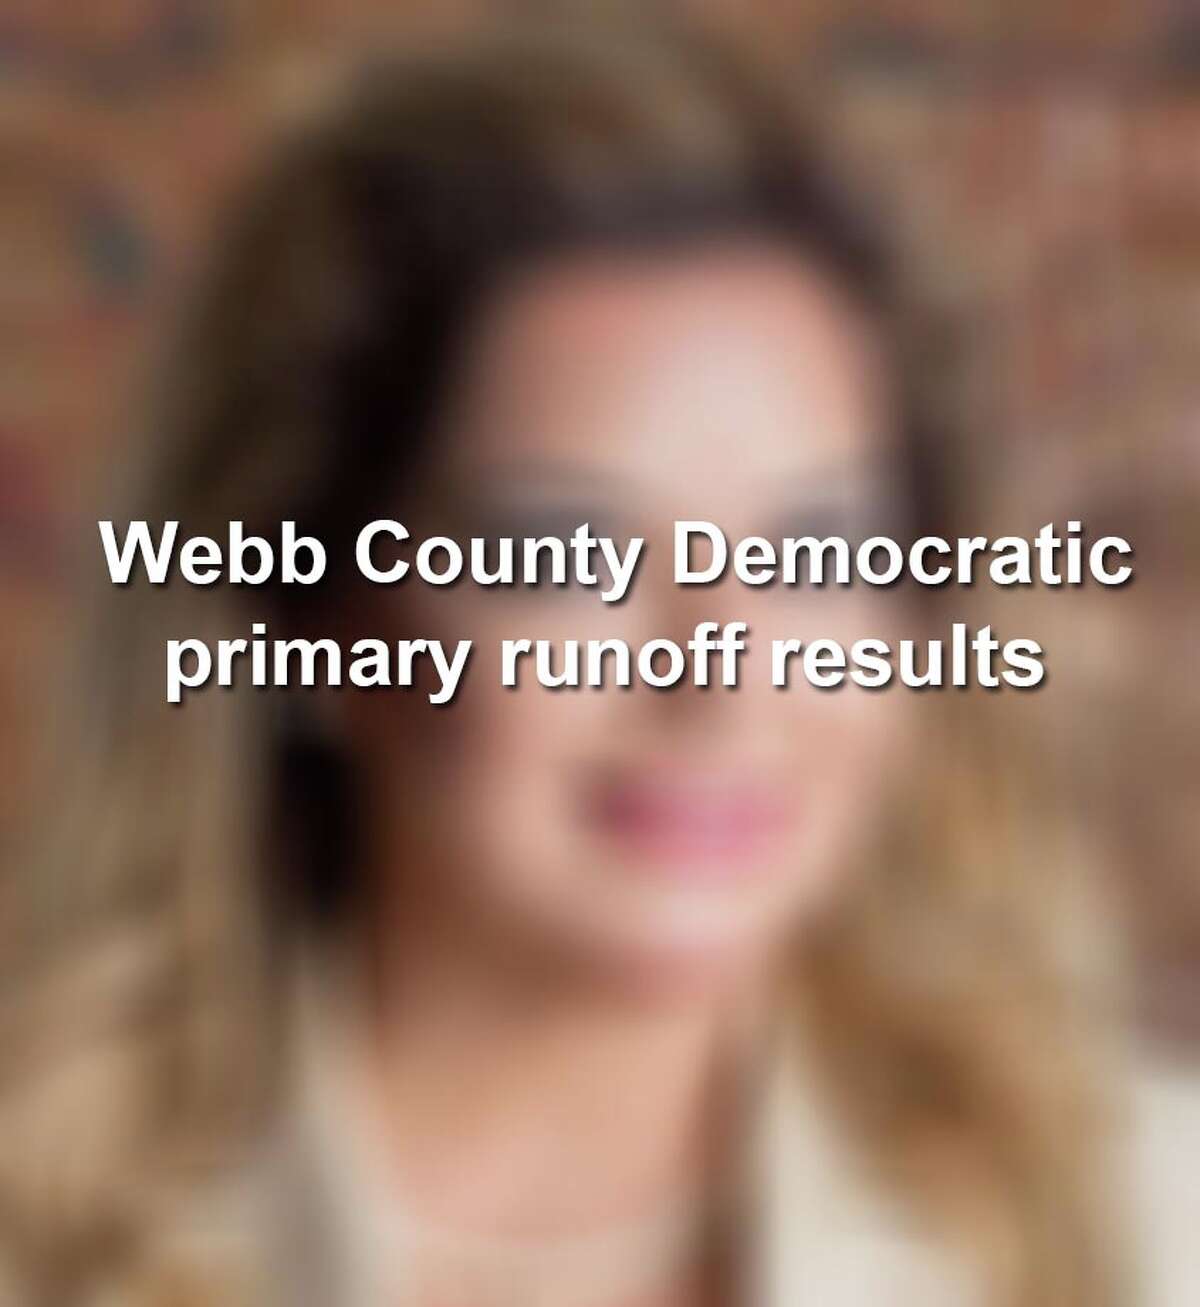 Here are the results from the Webb County Democratic primary.